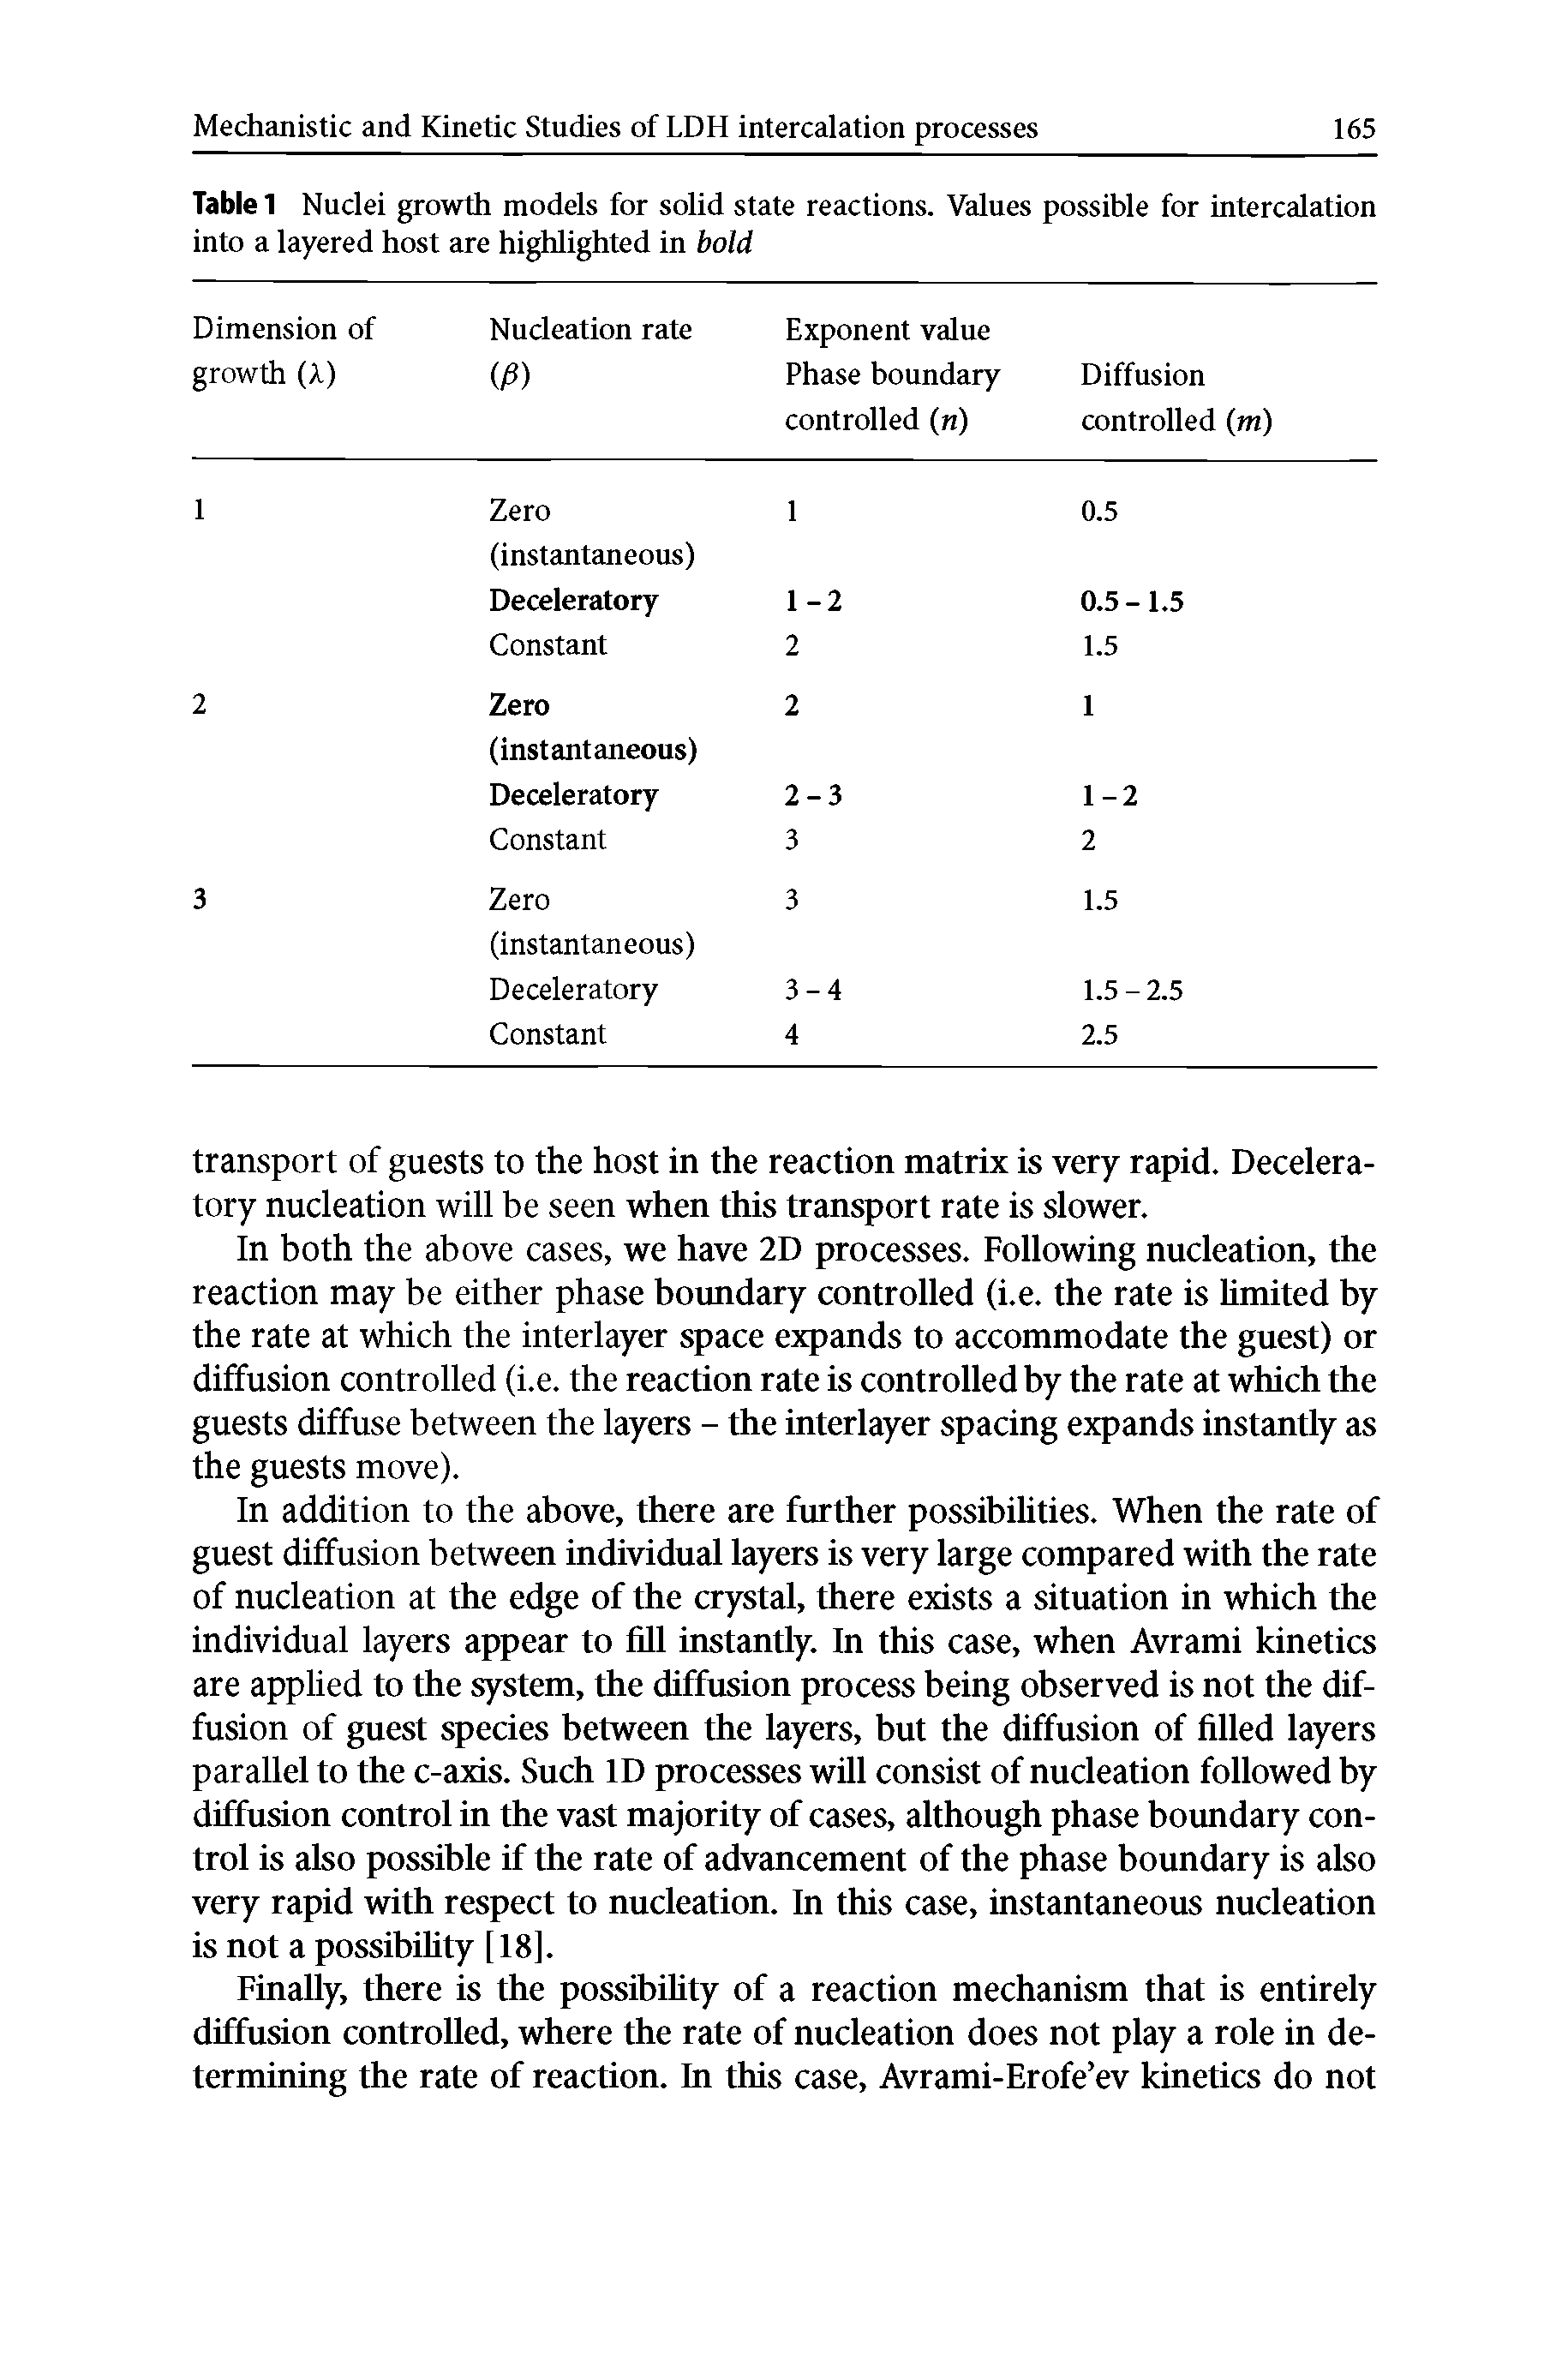 Table 1 Nuclei growth models for solid state reactions. Values possible for intercalation into a layered host are highlighted in bold ...